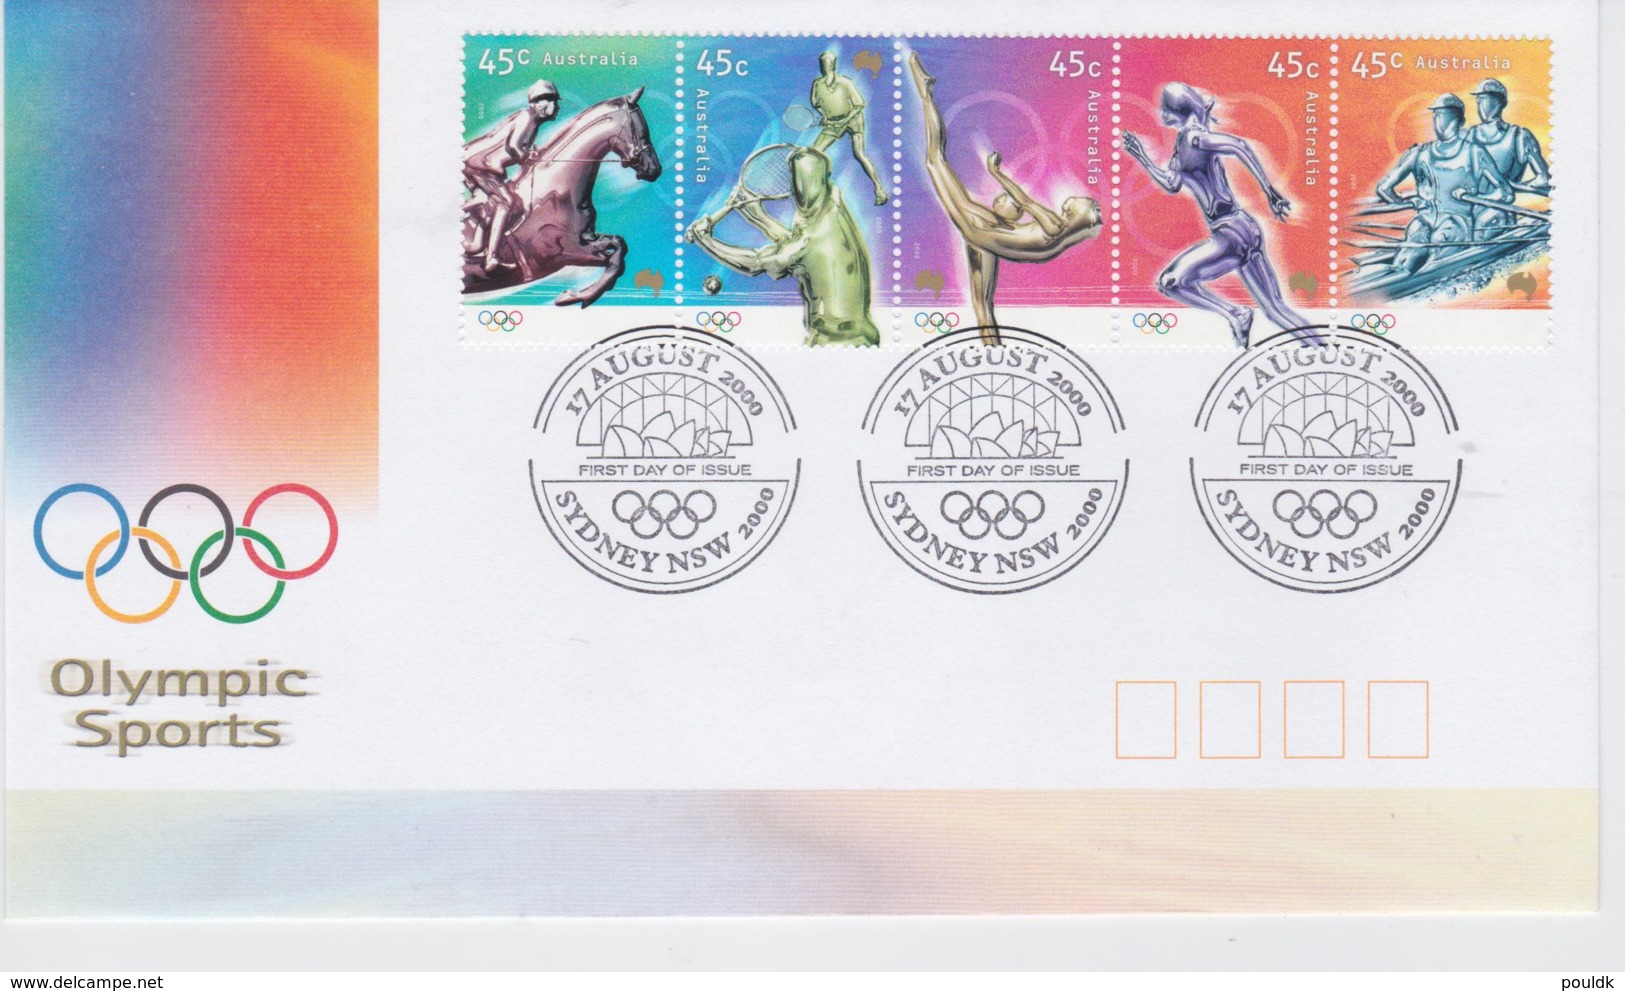 Australia 2000 FDC Olympic Games Sydney - Strip Of Five Stamps (G103-44) - Ete 2000: Sydney